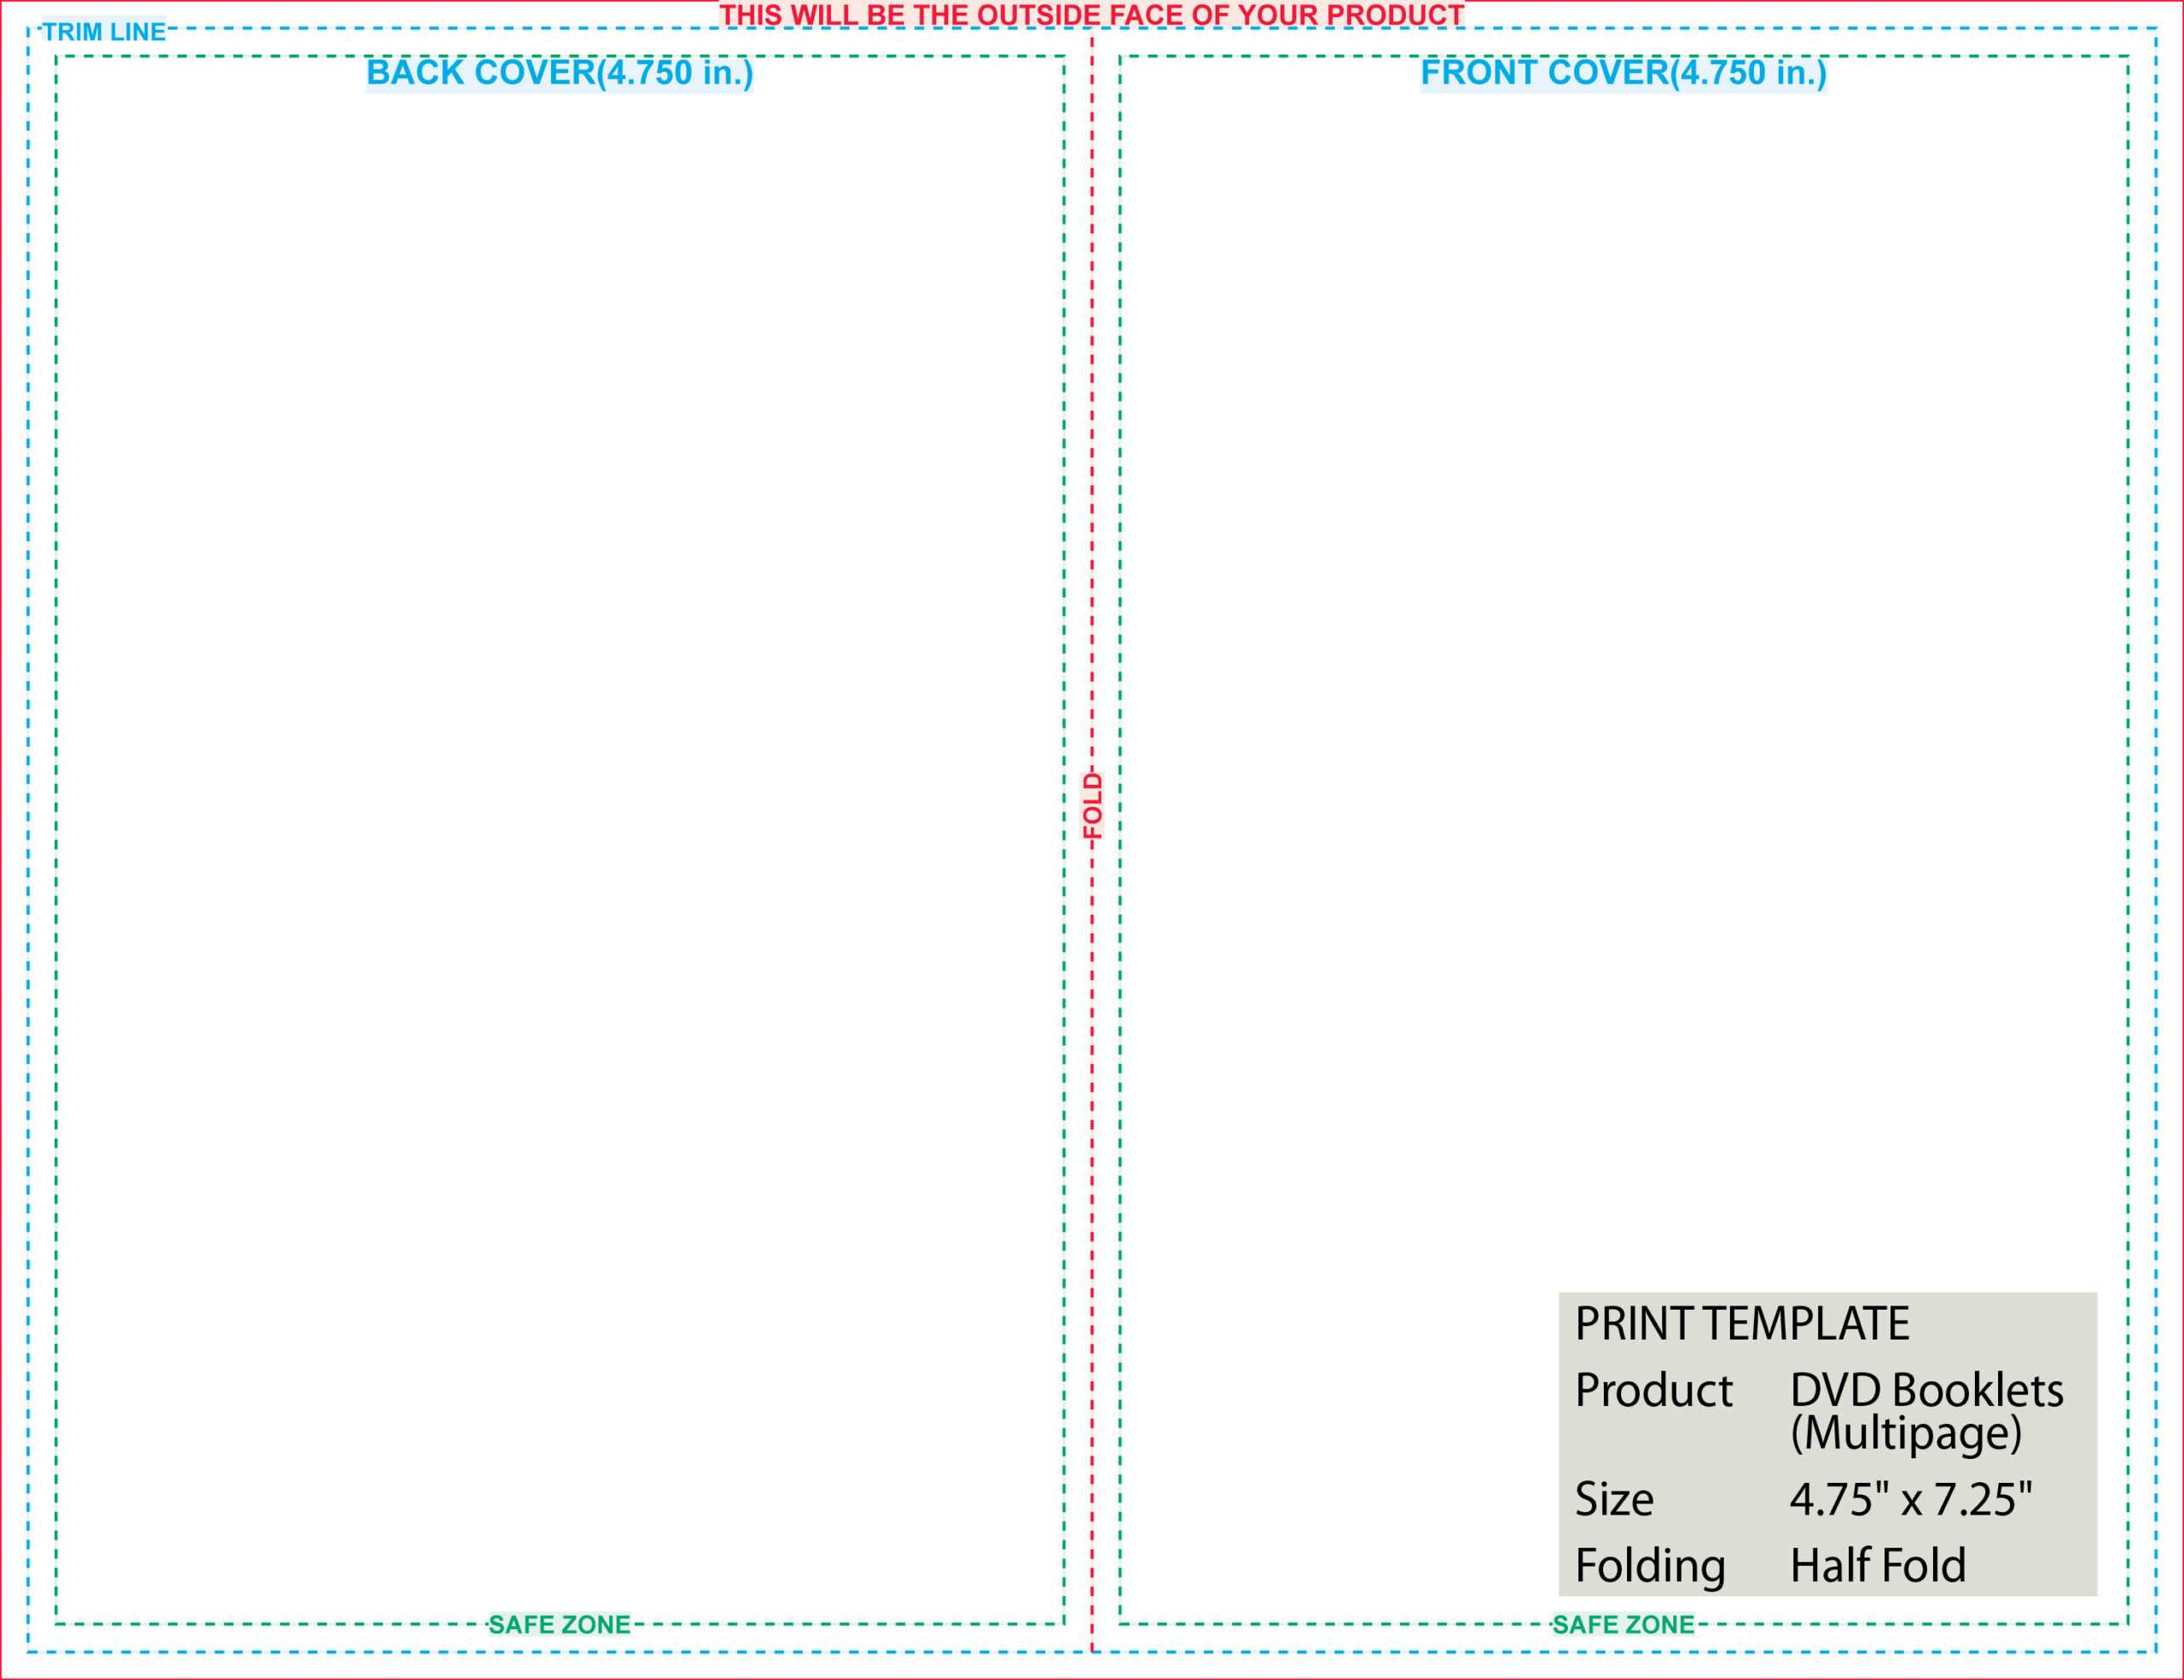 007 Template Ideas 75X7 25 Multipage Dvd Booklets Quarter With Regard To Half Fold Card Template